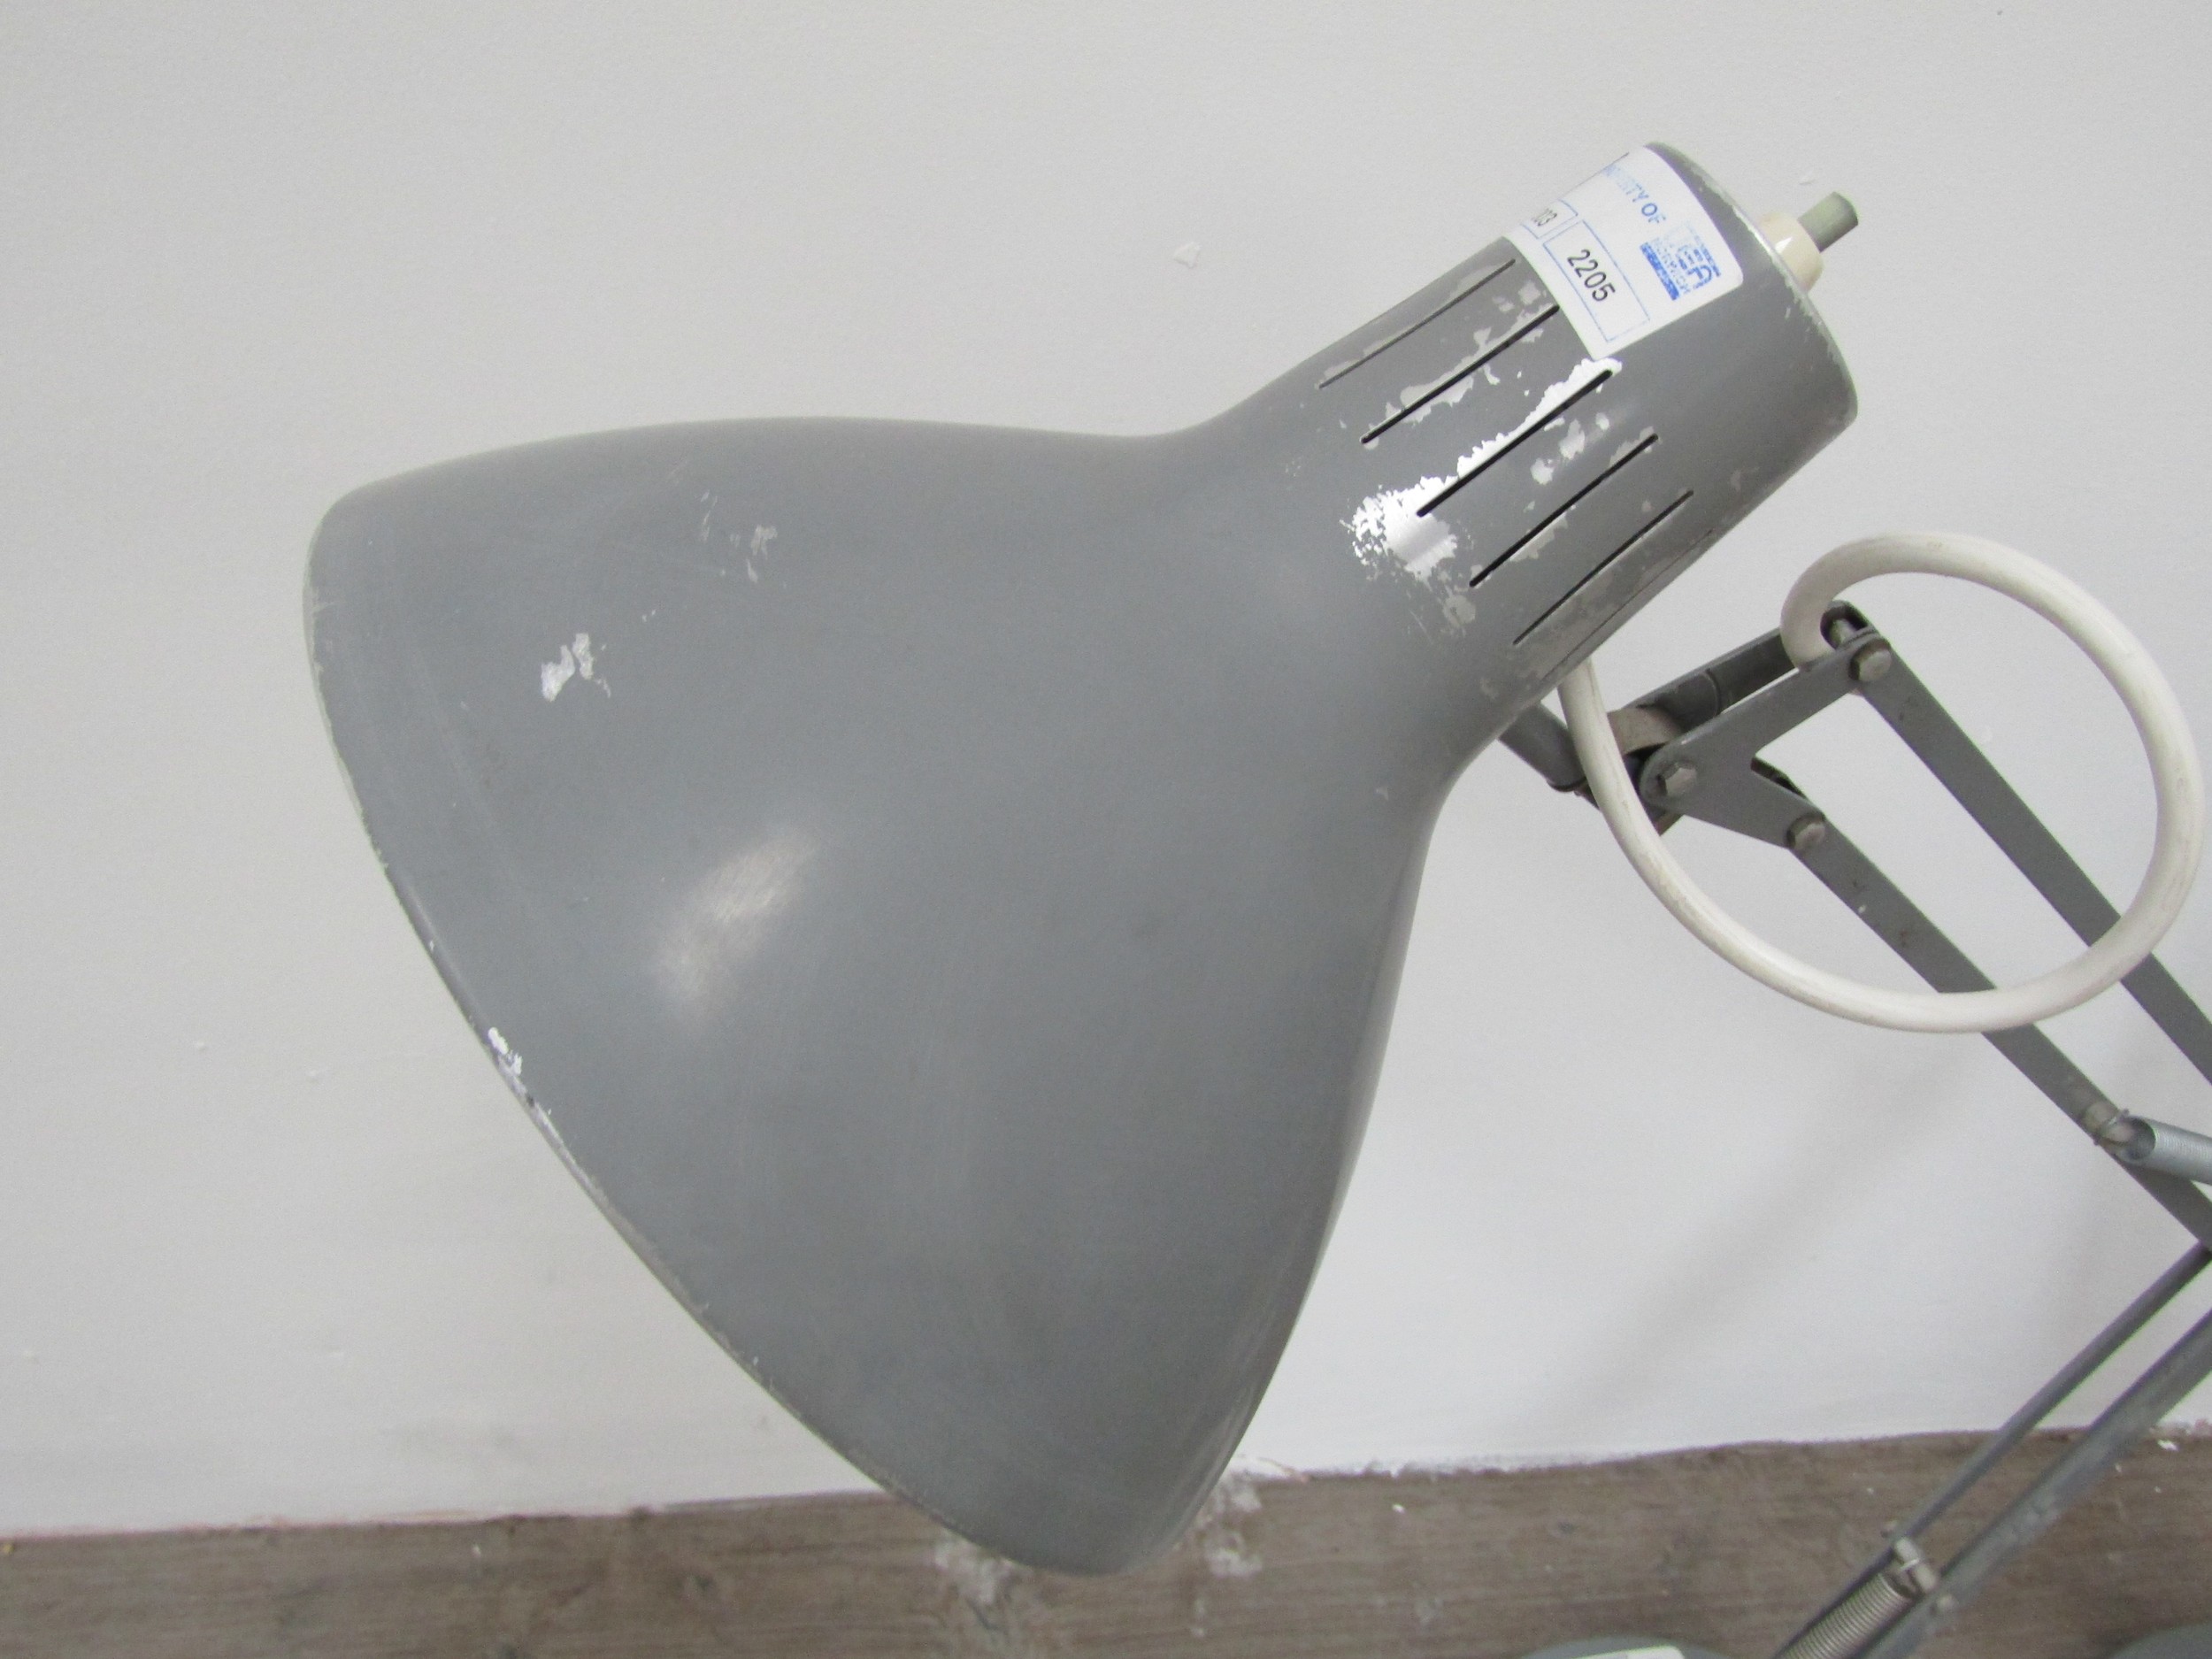 Four '1001' model angle poise lamps in grey colourway - Image 3 of 3